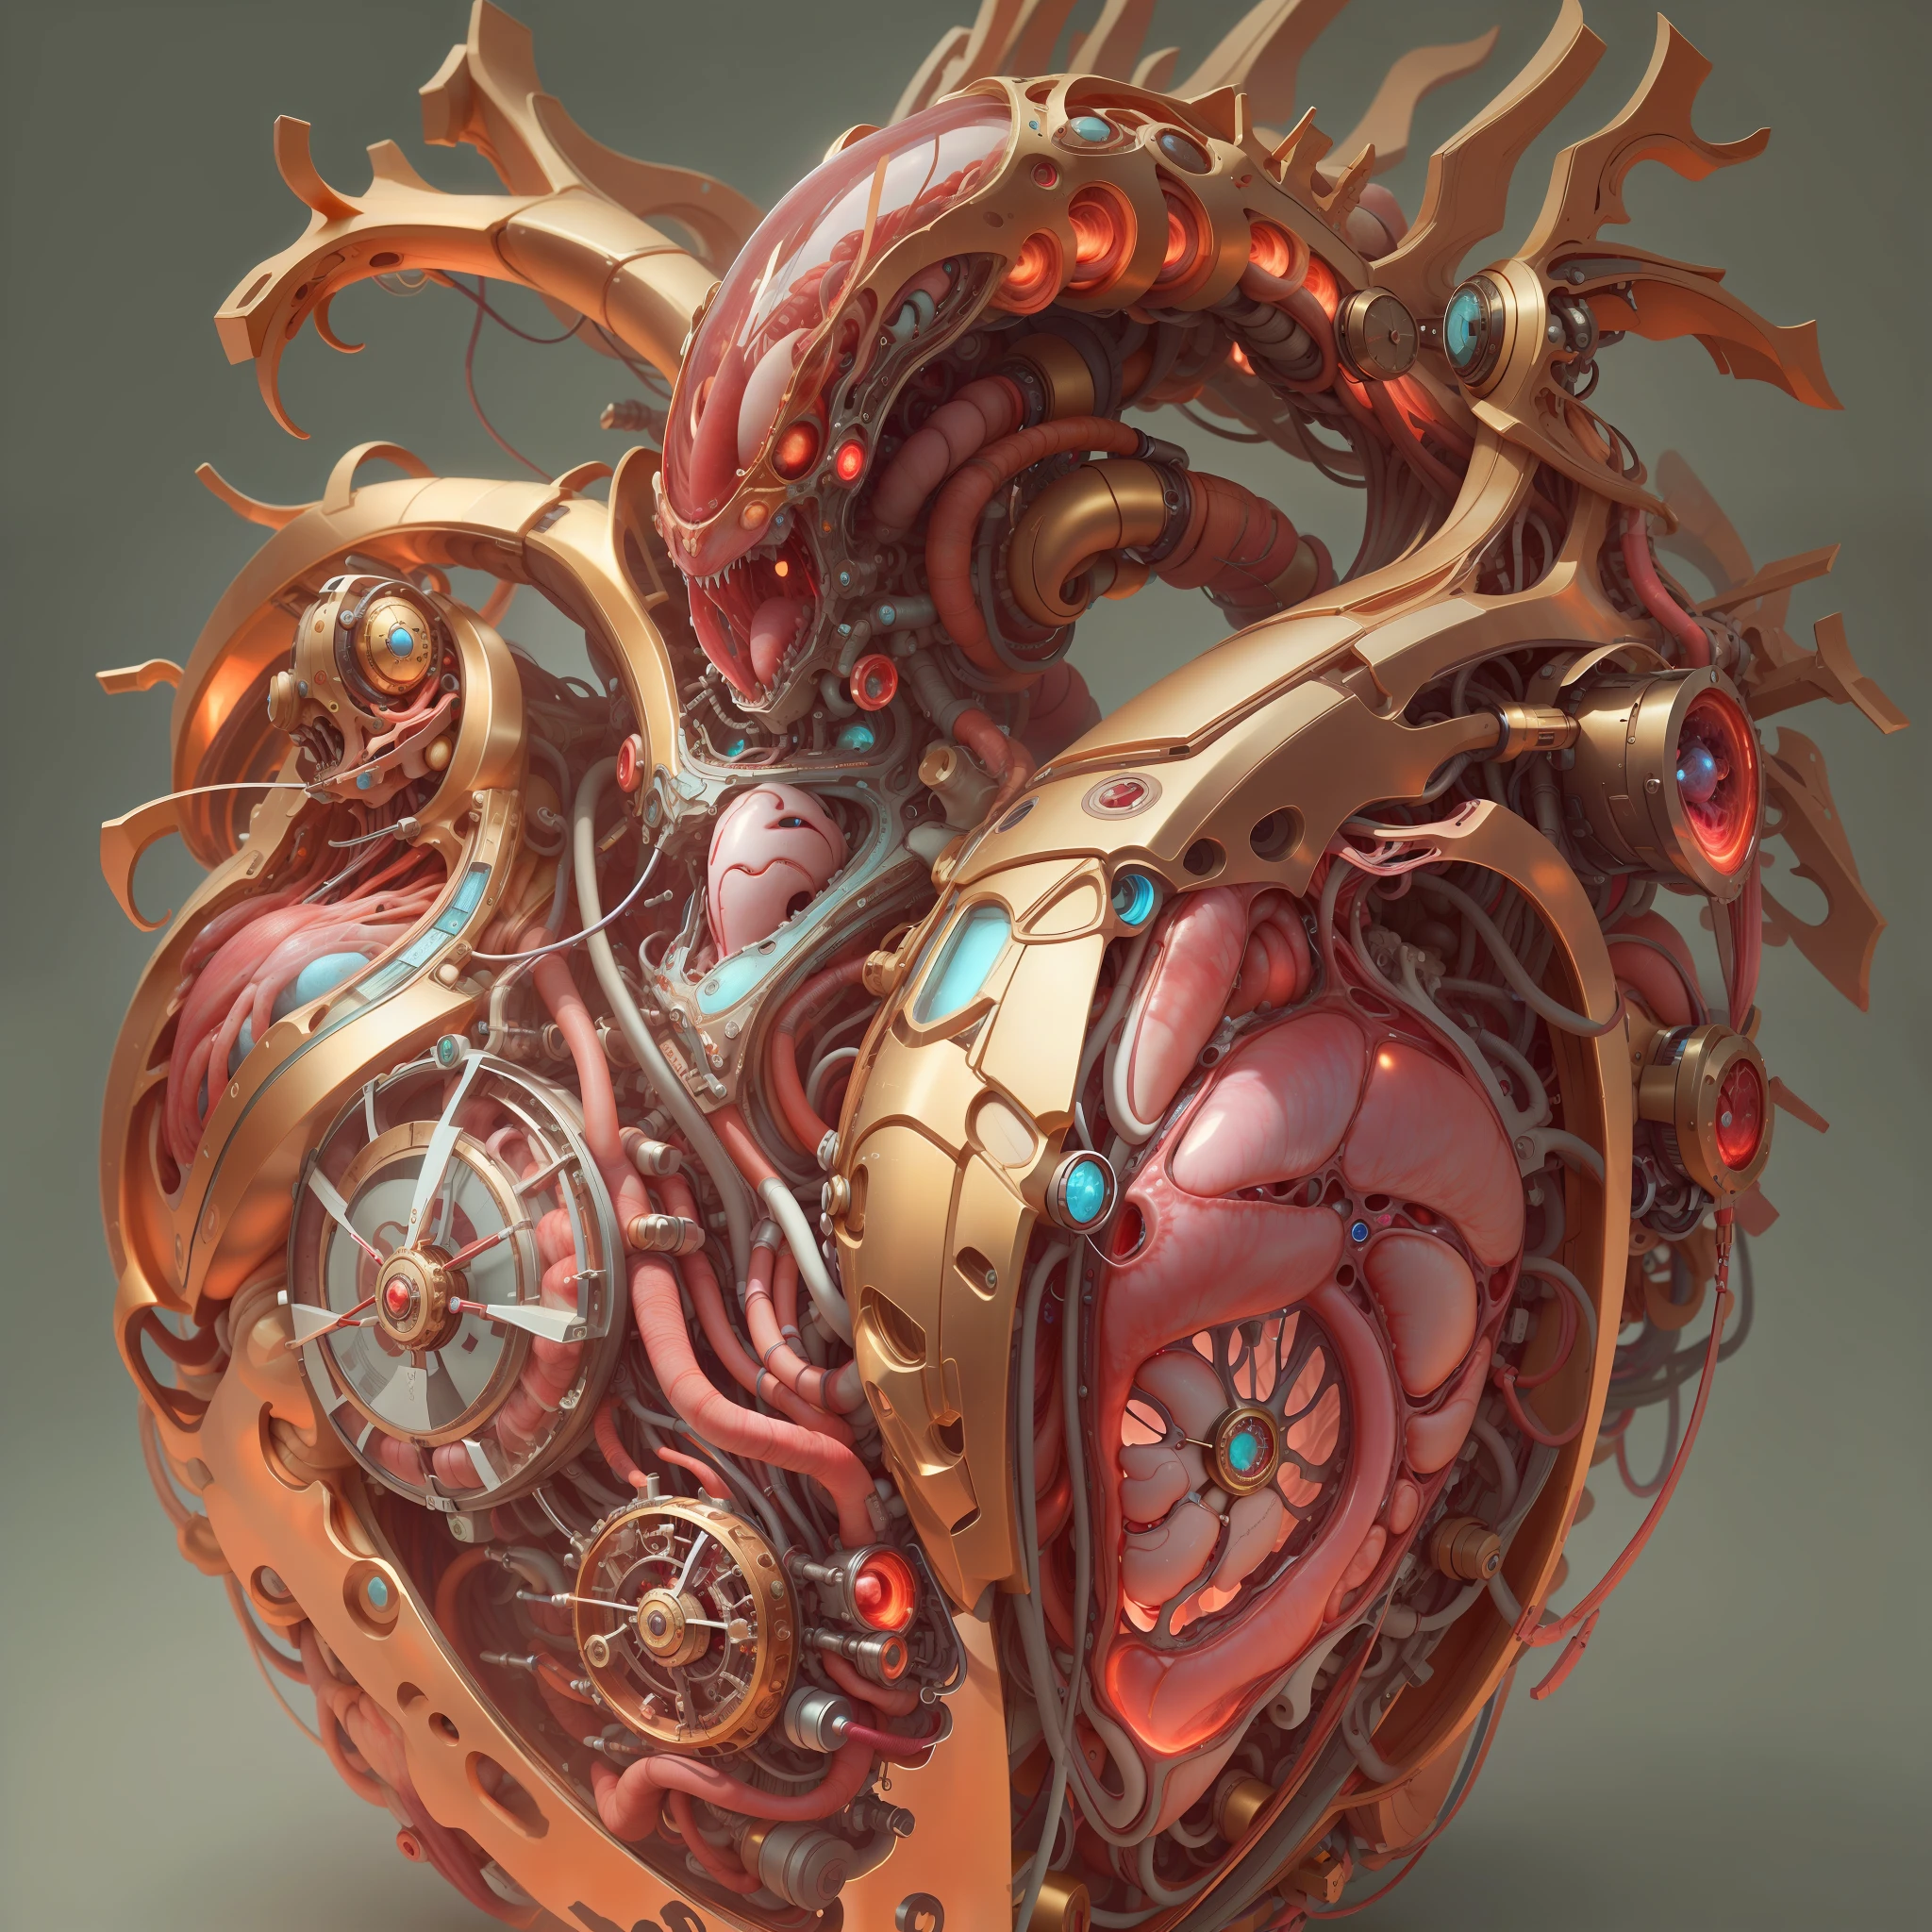 best qualtiy，tmasterpiece，Ultra-high resolution，（realisticlying：1.4），absurderes，intriguing，High color saturation，3D Anatomy，Glow-emitting pulsating veins，sci-fy，3D mechanical biological heart， fanciful，Beautiful 3D human heart decoration design，human heart，hisui/Gold and Copper/The golden dragon/Mechanical dial/Embedded in the heart of a living creature，BiopunkAI